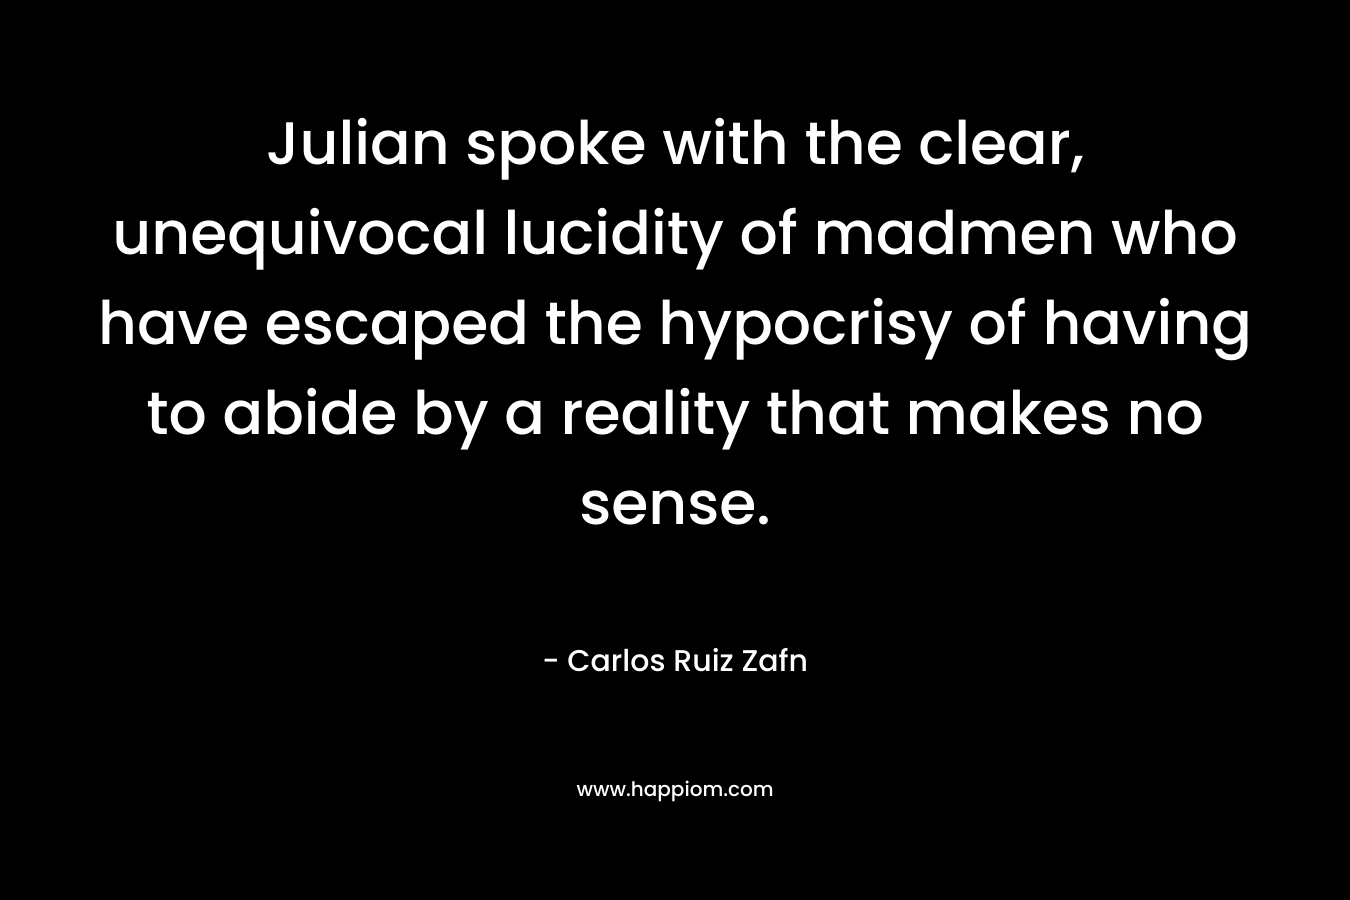 Julian spoke with the clear, unequivocal lucidity of madmen who have escaped the hypocrisy of having to abide by a reality that makes no sense.